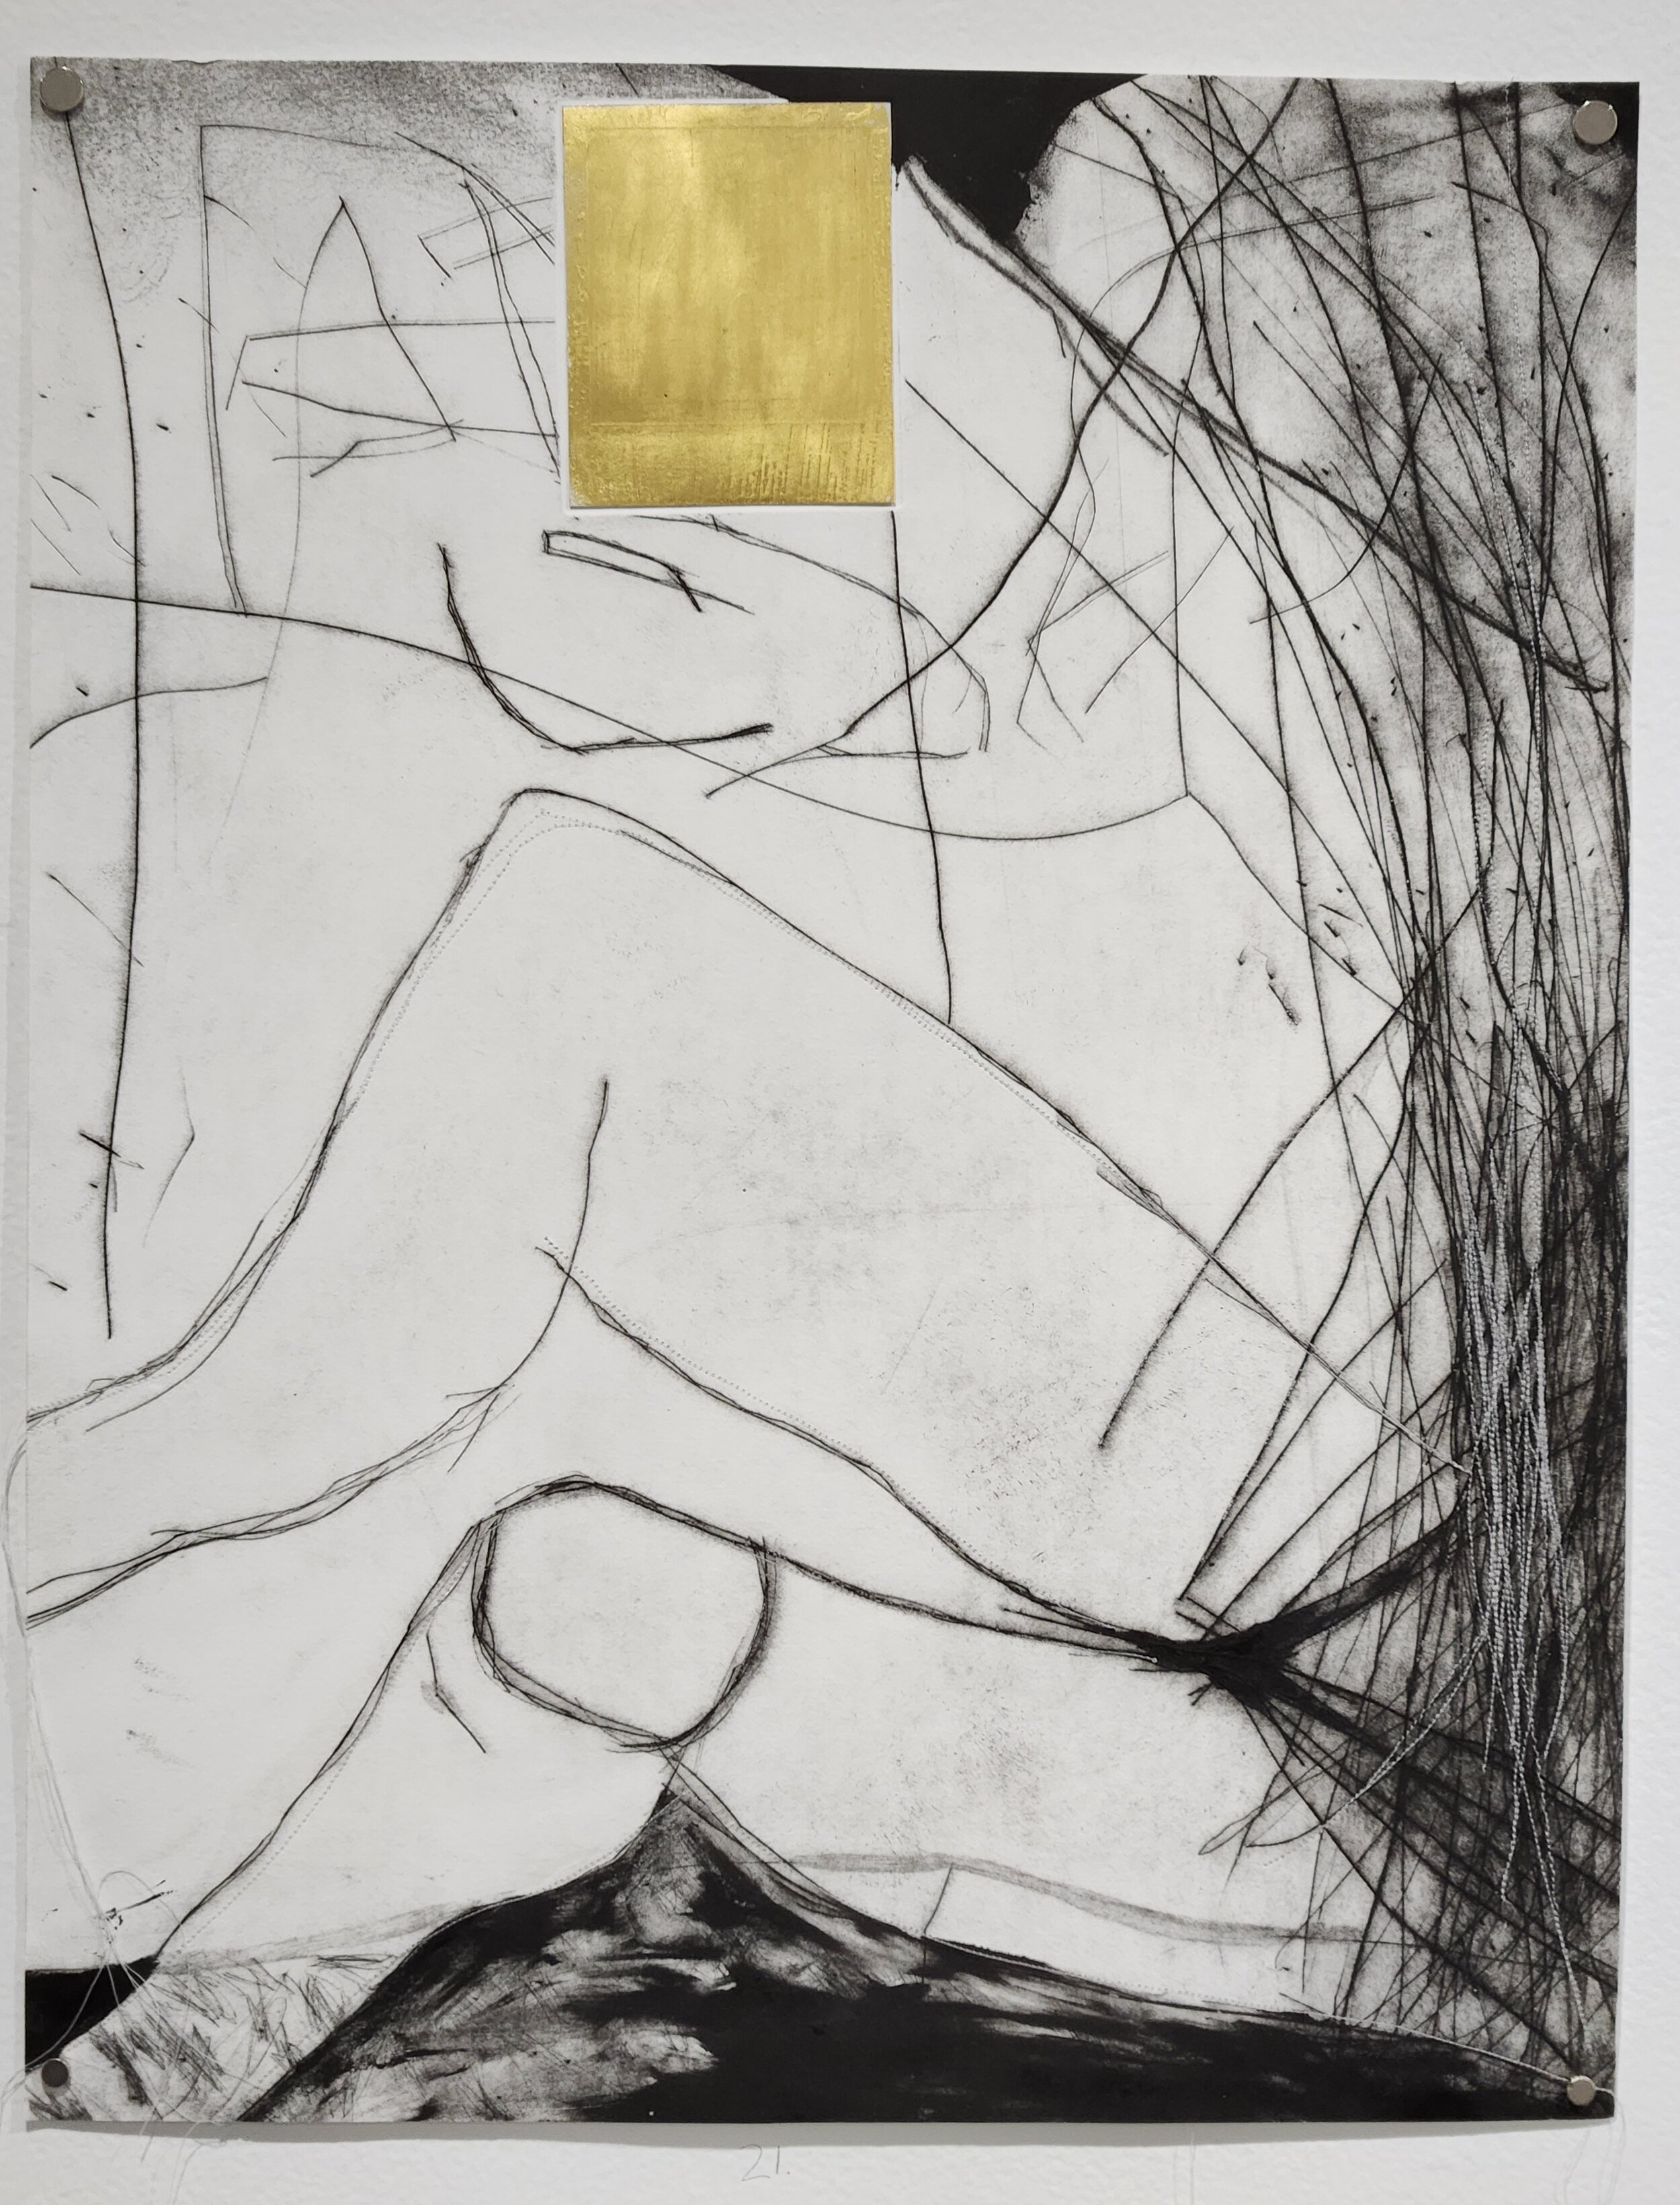   Dani and Sheilah ReStack ,  Angela Pralini's Document for Thinking , 2022, etching and gold leaf polaroid, 20 x 24" 